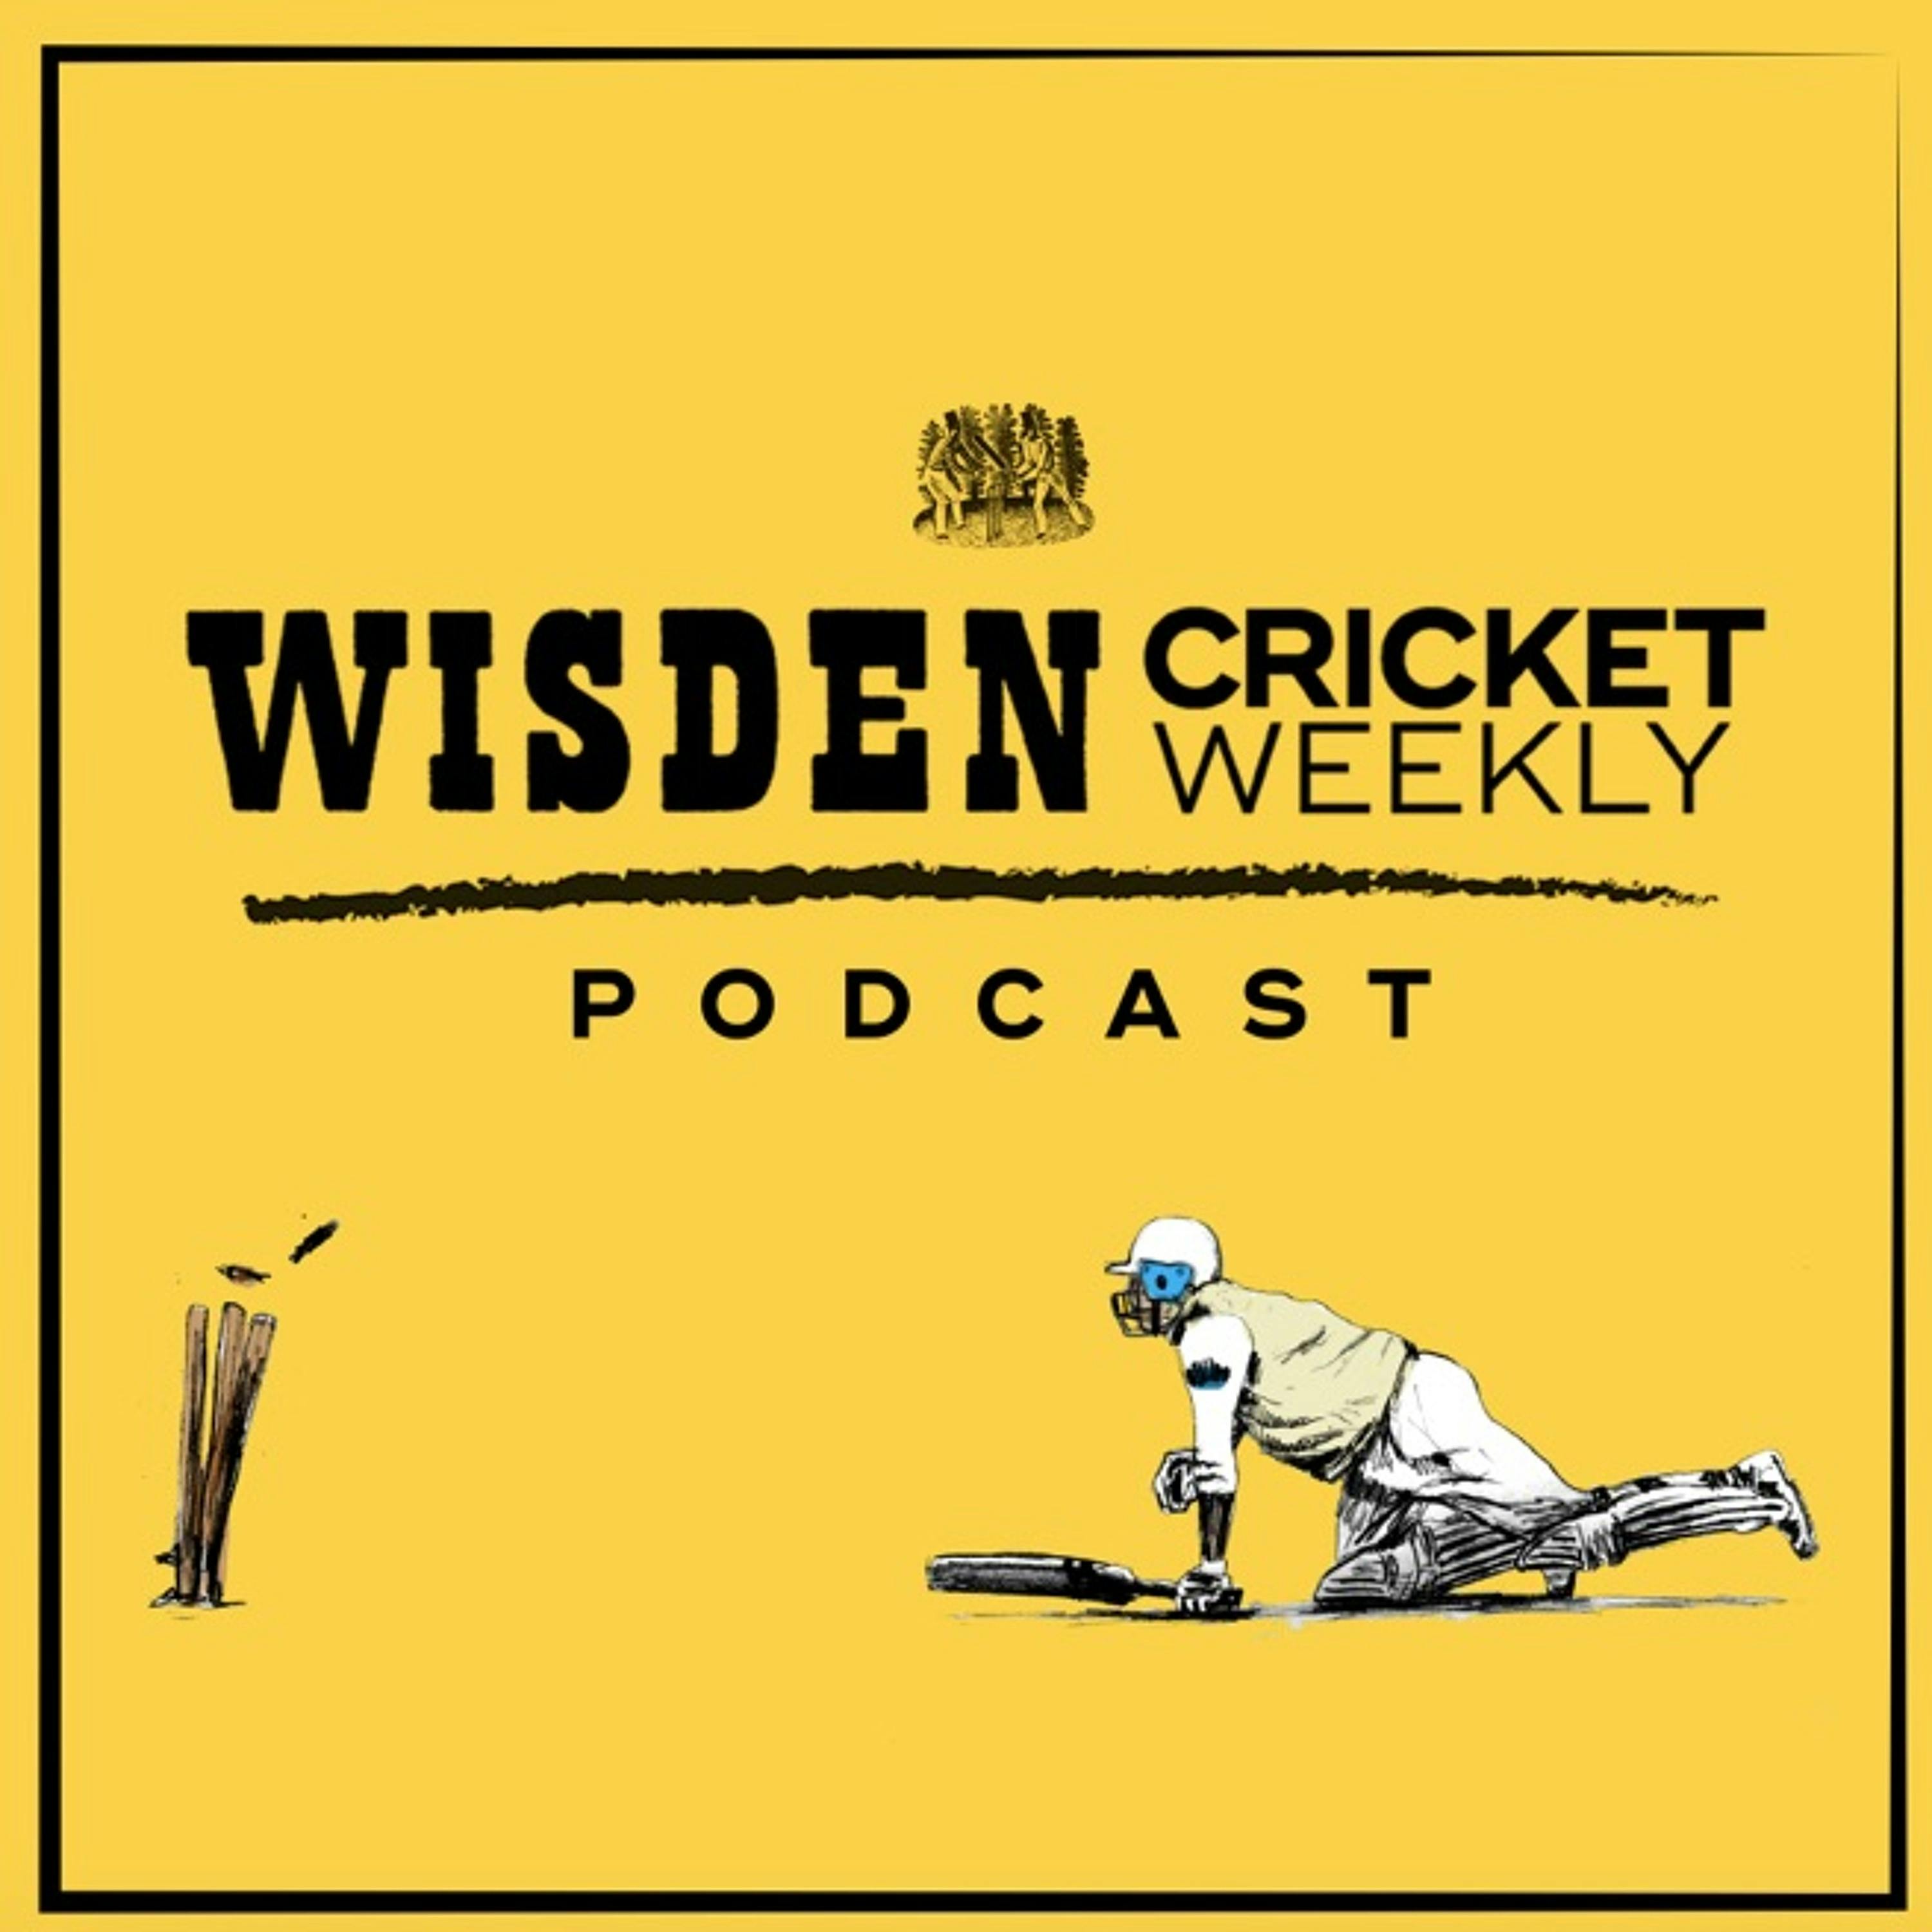 Episode 26 – The philosophy of DRS, World Cup squads and cricket's sliding doors moments